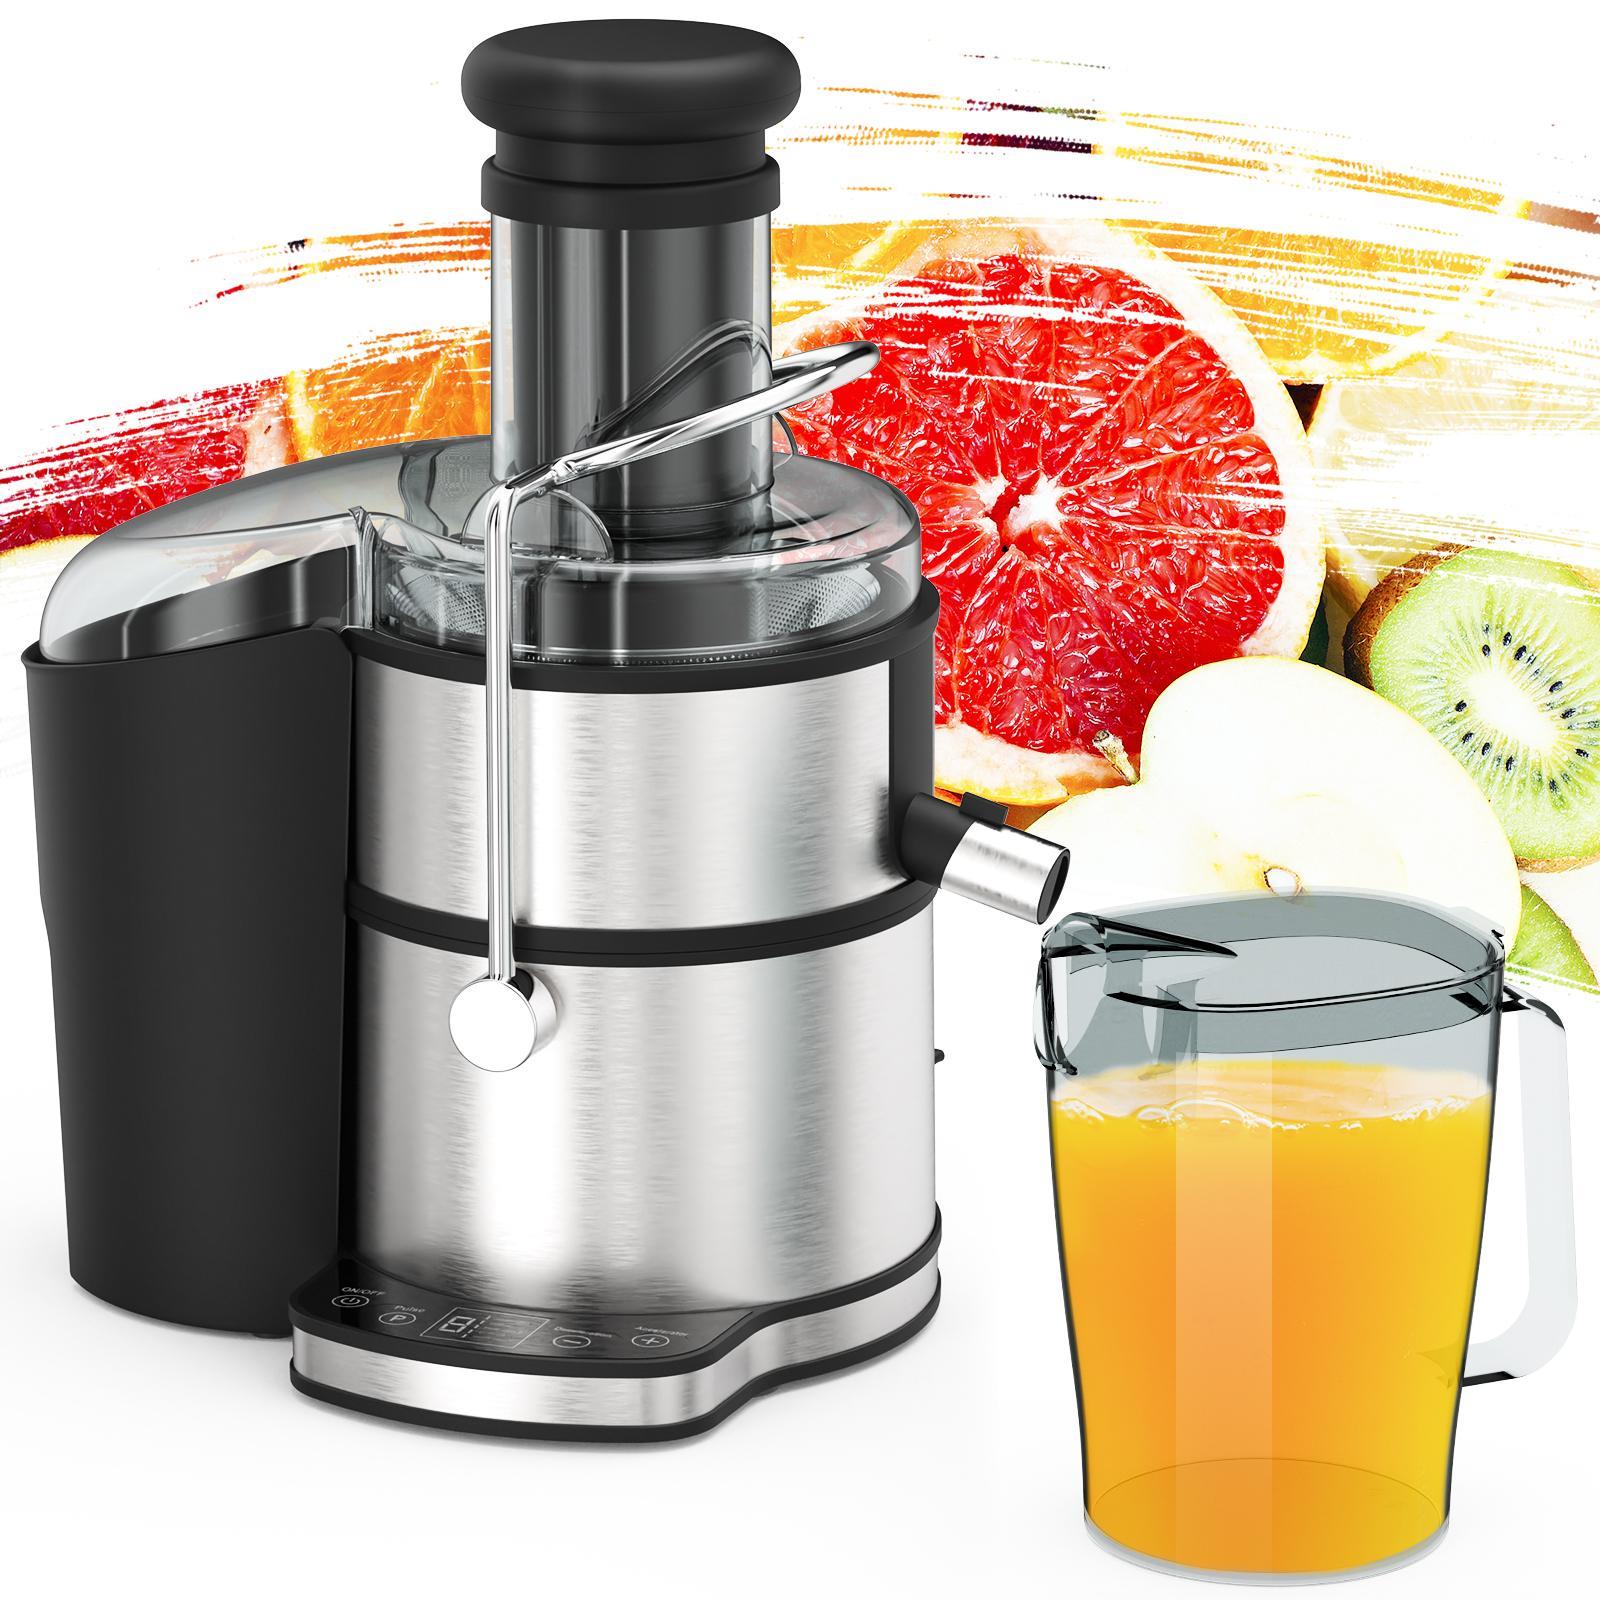 ADVWIN 800W Juicer Machine, Centrifugal Juicer Extractor with LCD Touch Control Wide Mouth 3.15” (8cm) Feed Chute